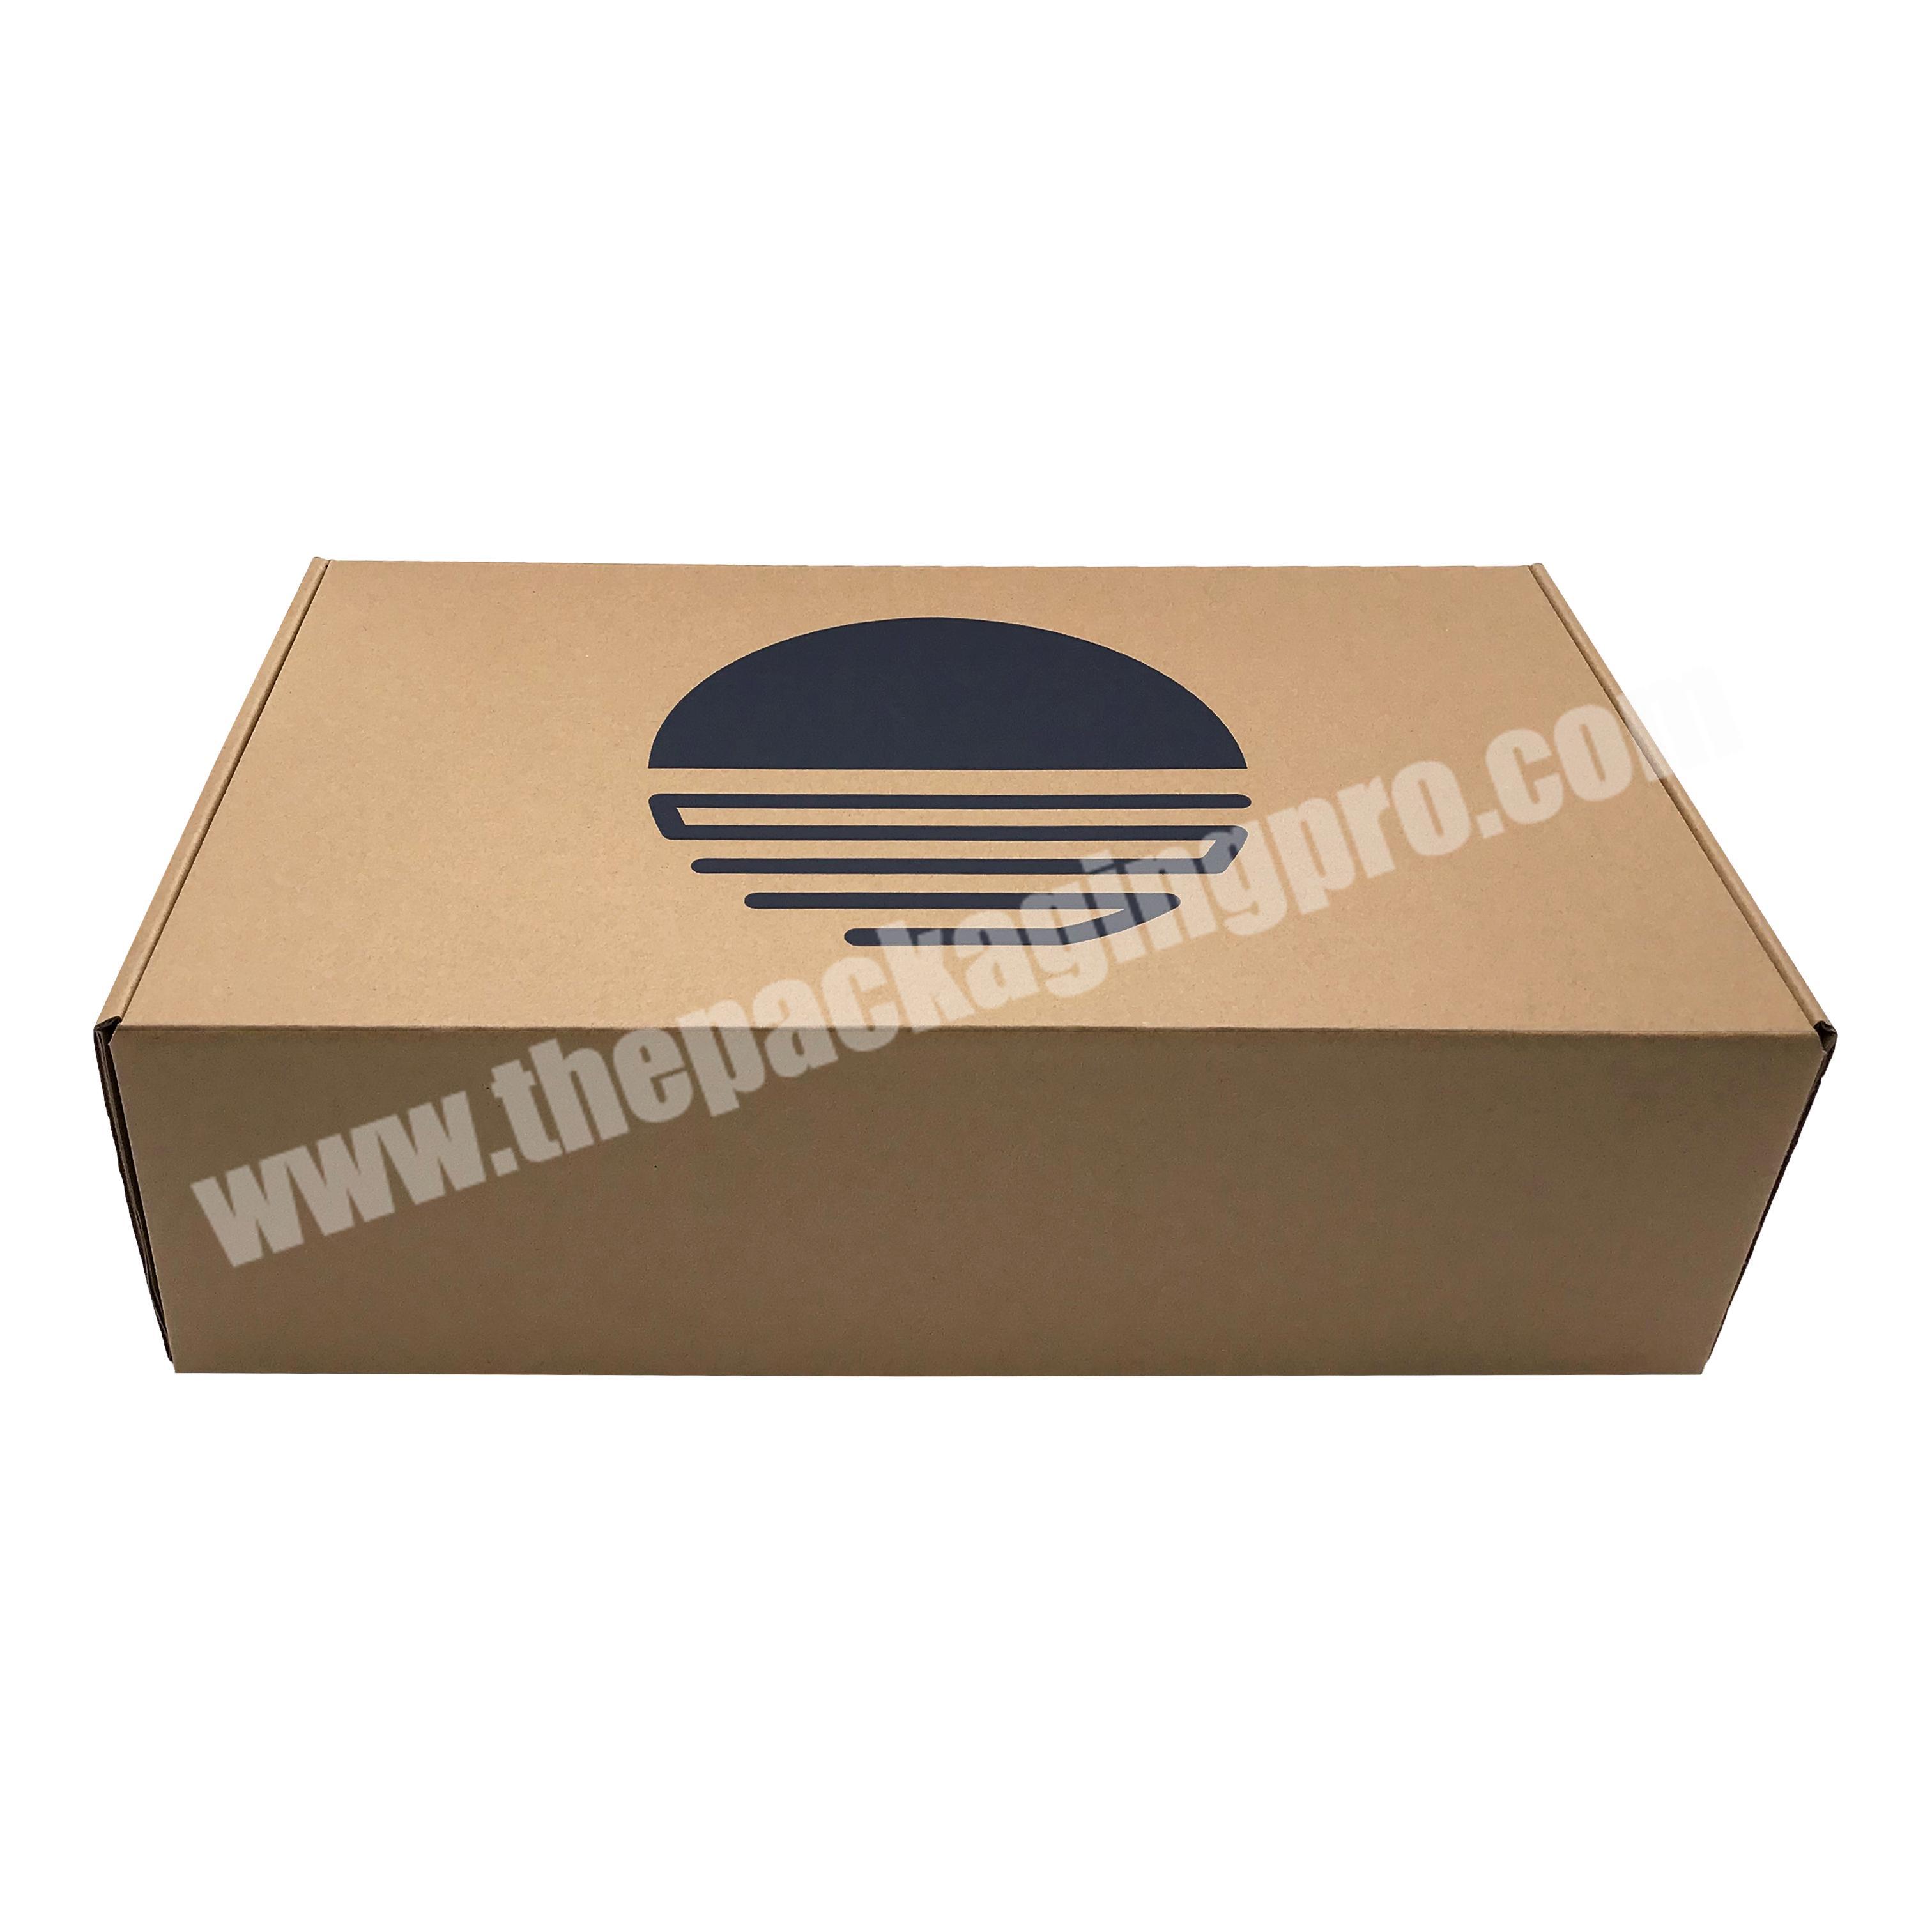 New products luxury colorful printed gift baseball cap packaging box